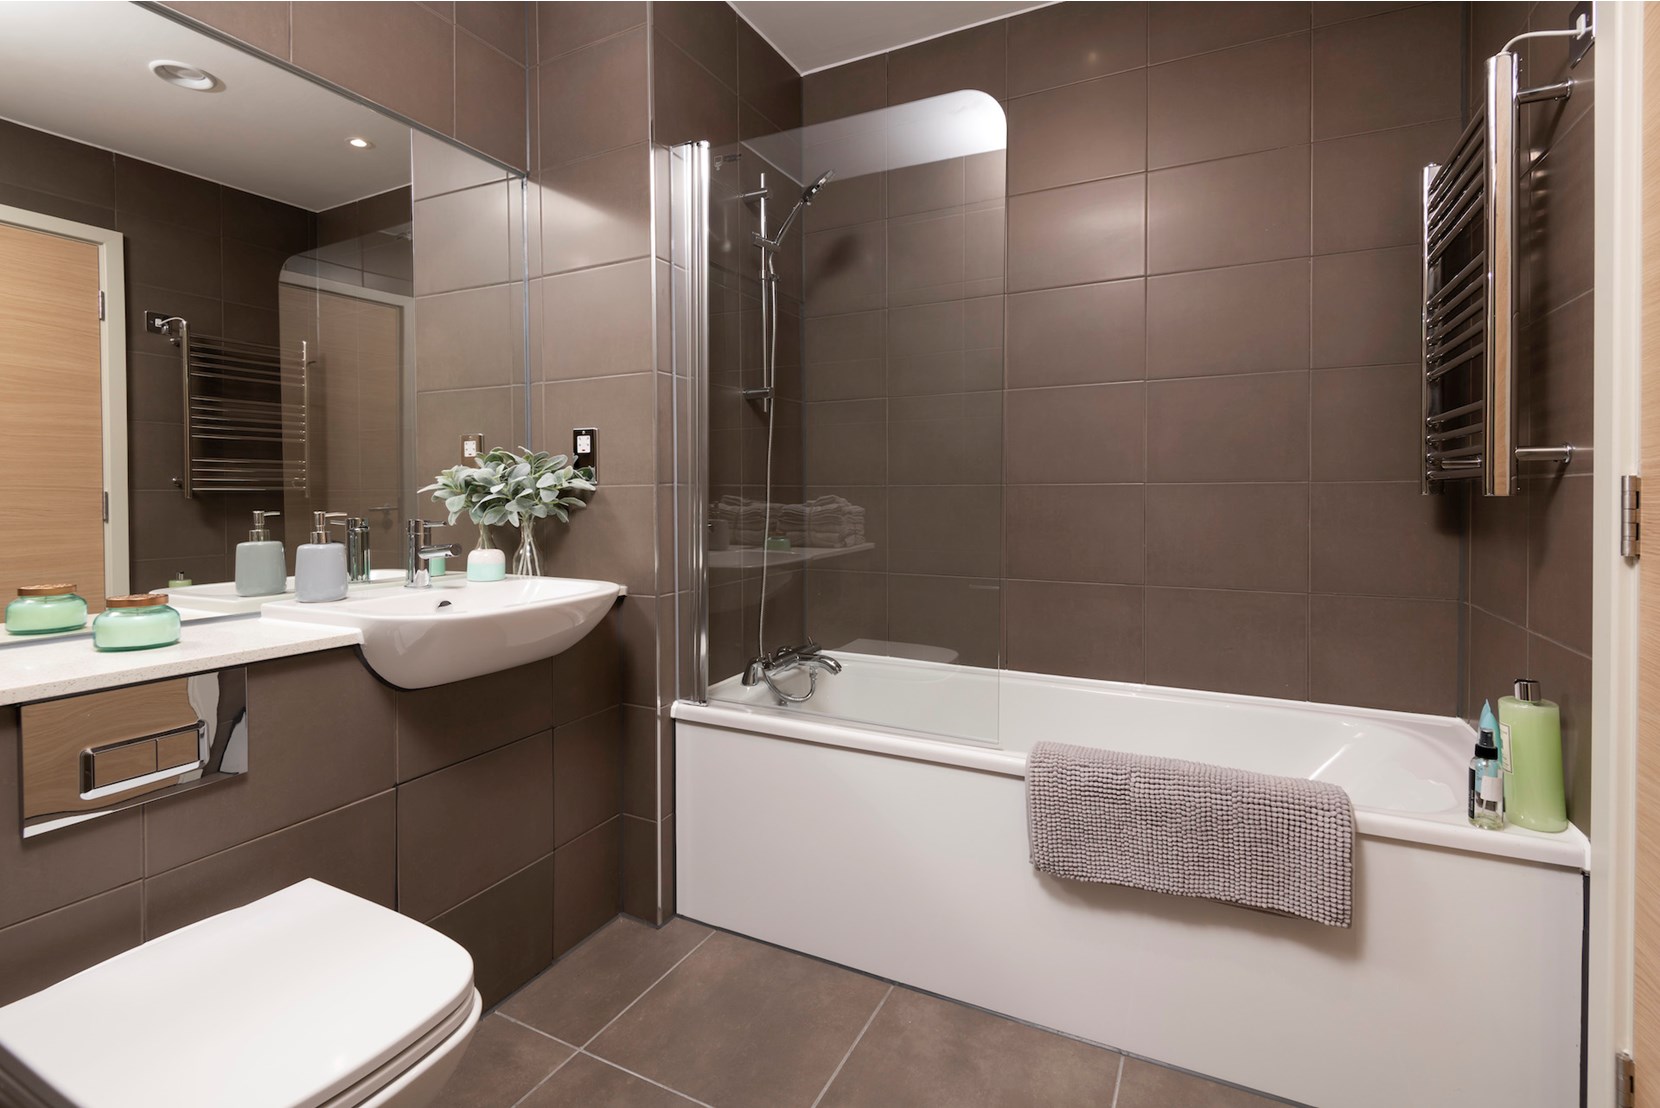 Apartments to Rent by Allsop at The Trilogy, Manchester, M15, bathroom